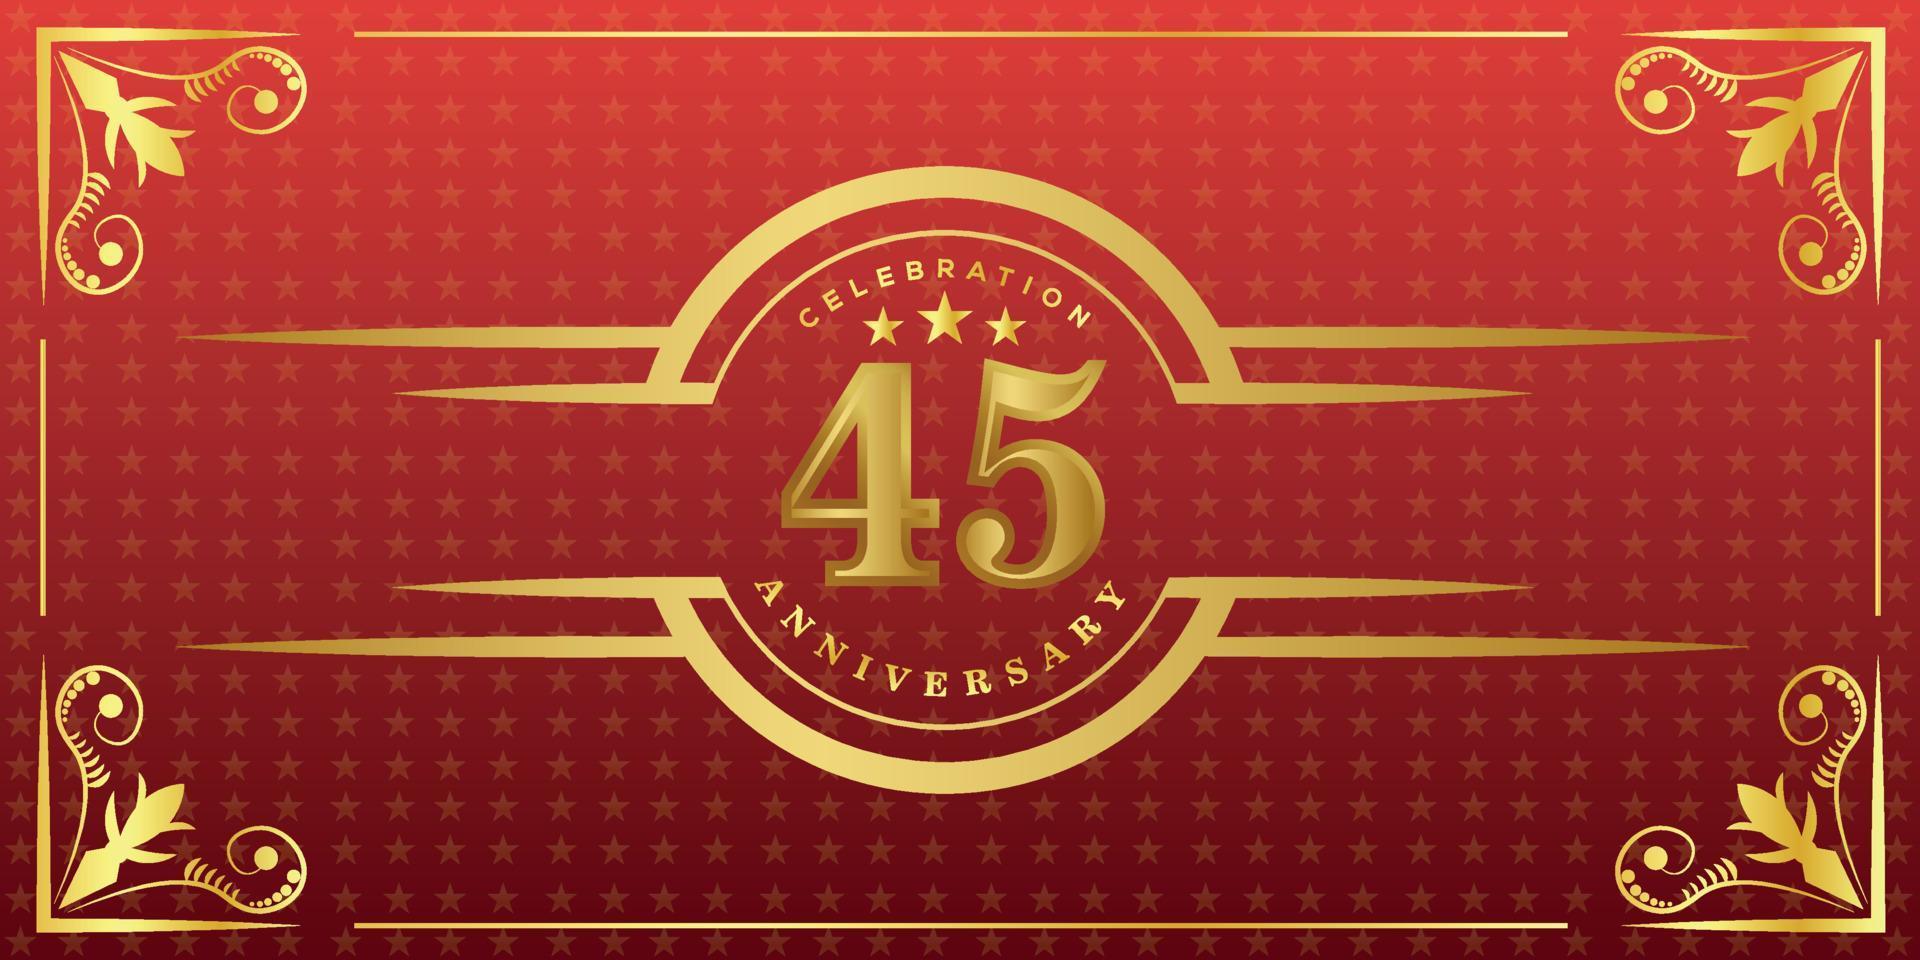 45th anniversary logo with golden ring, confetti and gold border isolated on elegant red background, sparkle, vector design for greeting card and invitation card